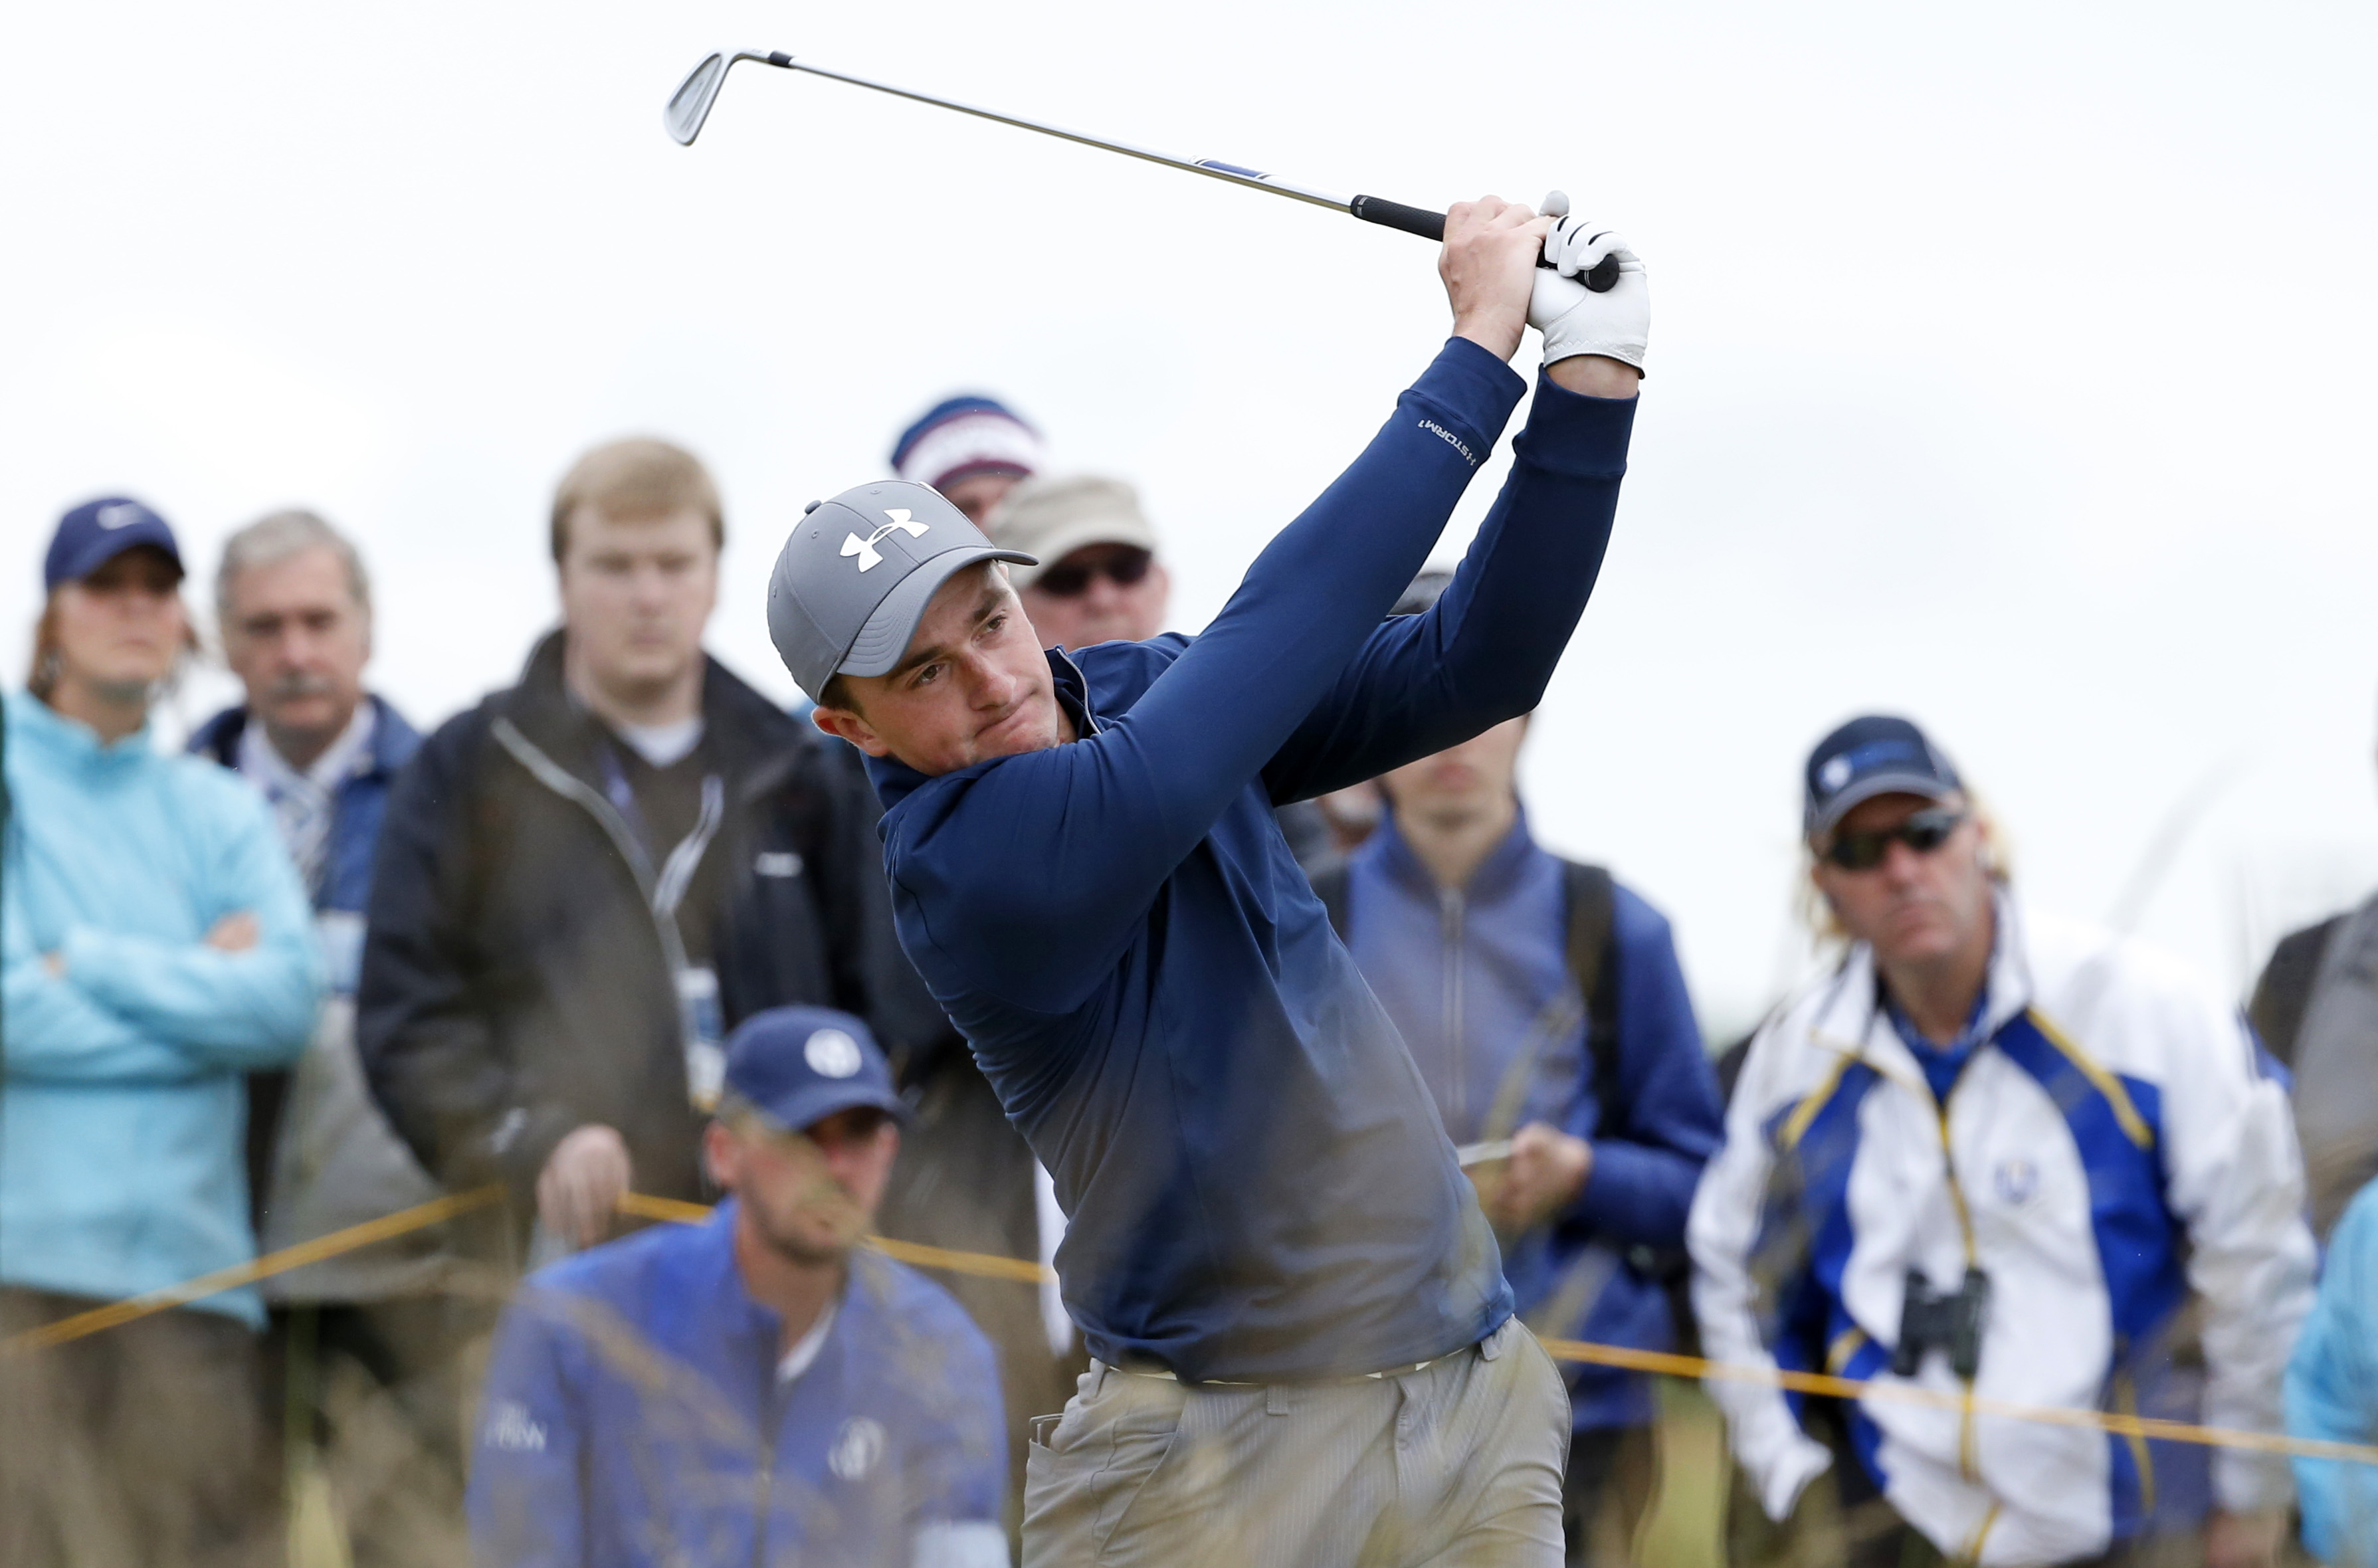 Paul Dunne is in position to be the first amateur to win the British Open since 1930. (AP)